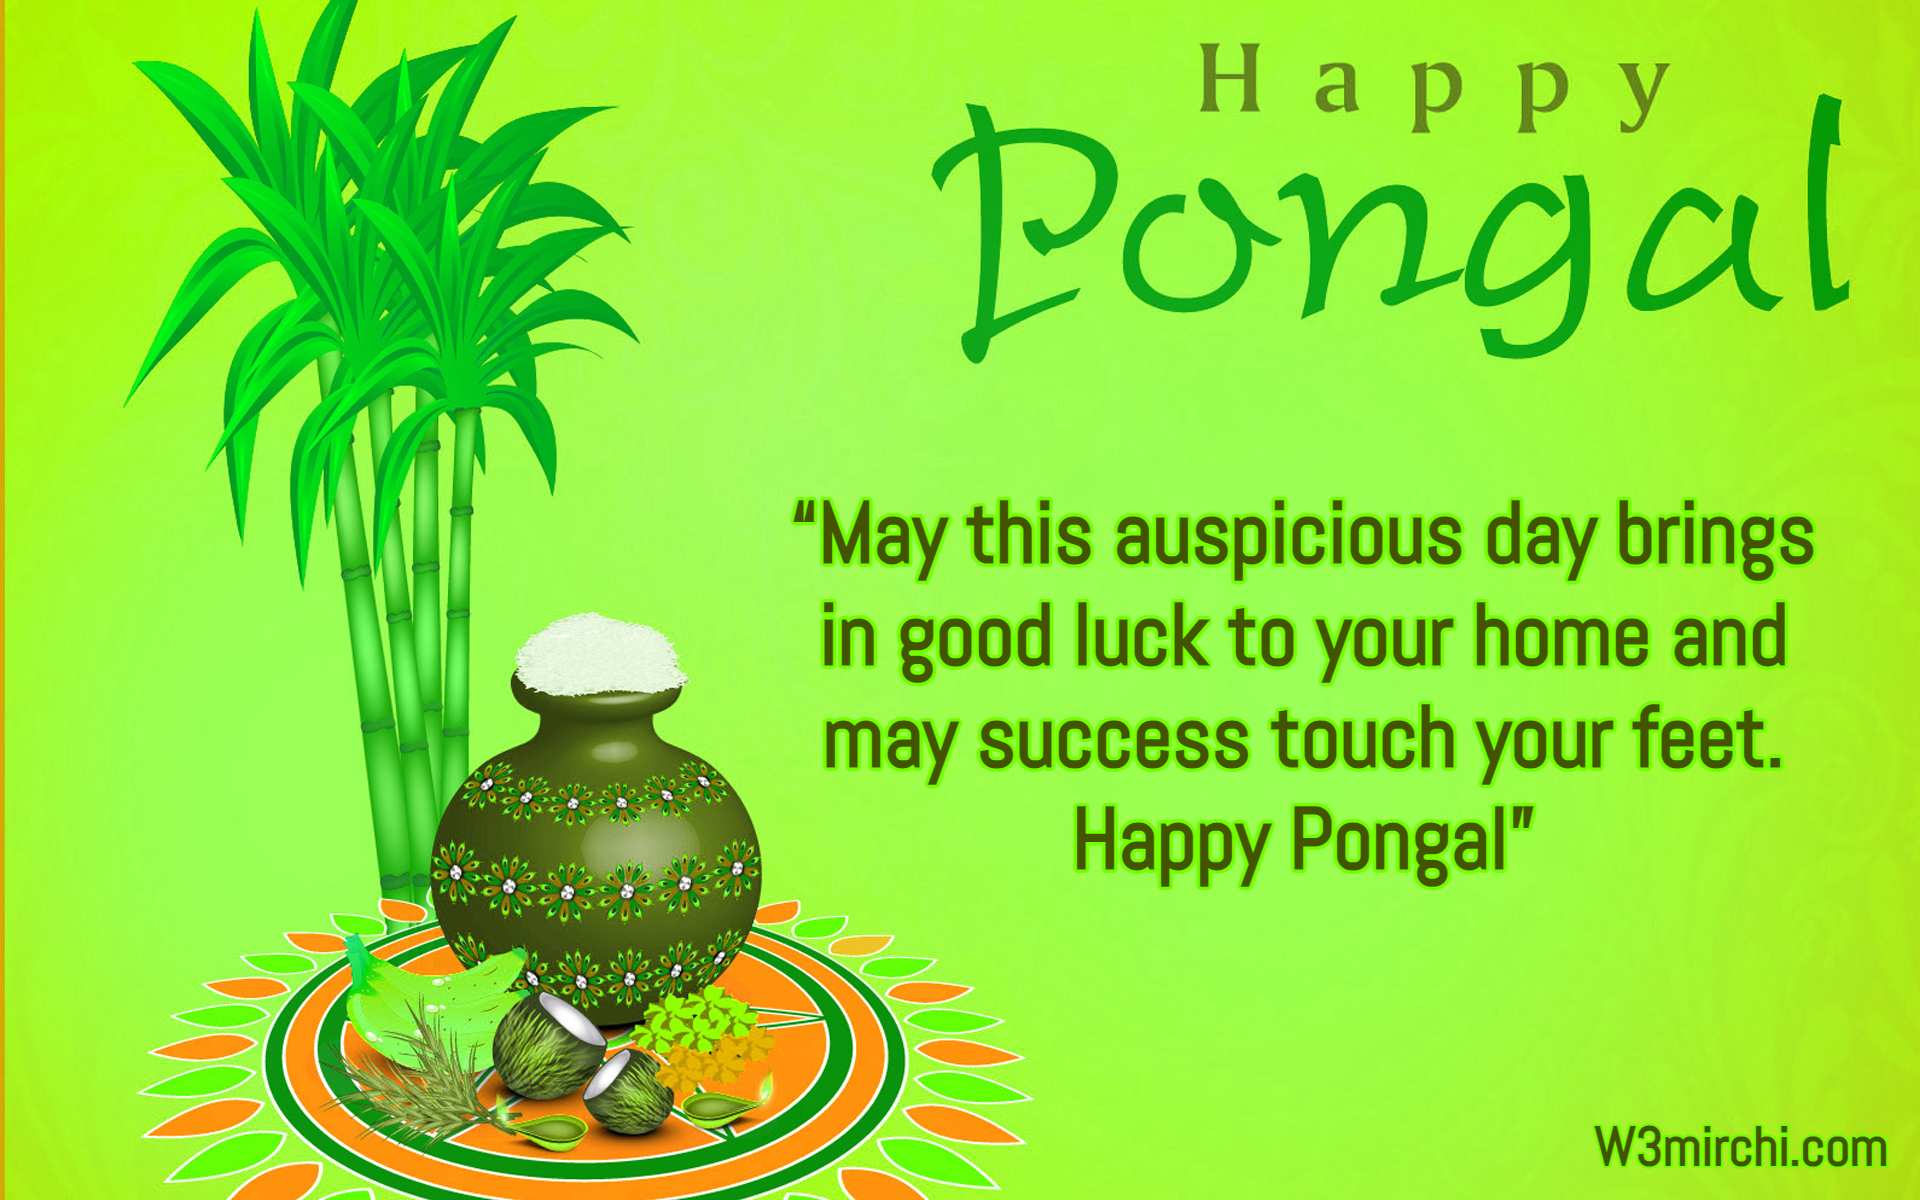 "Wish you a very Happy Pongal”